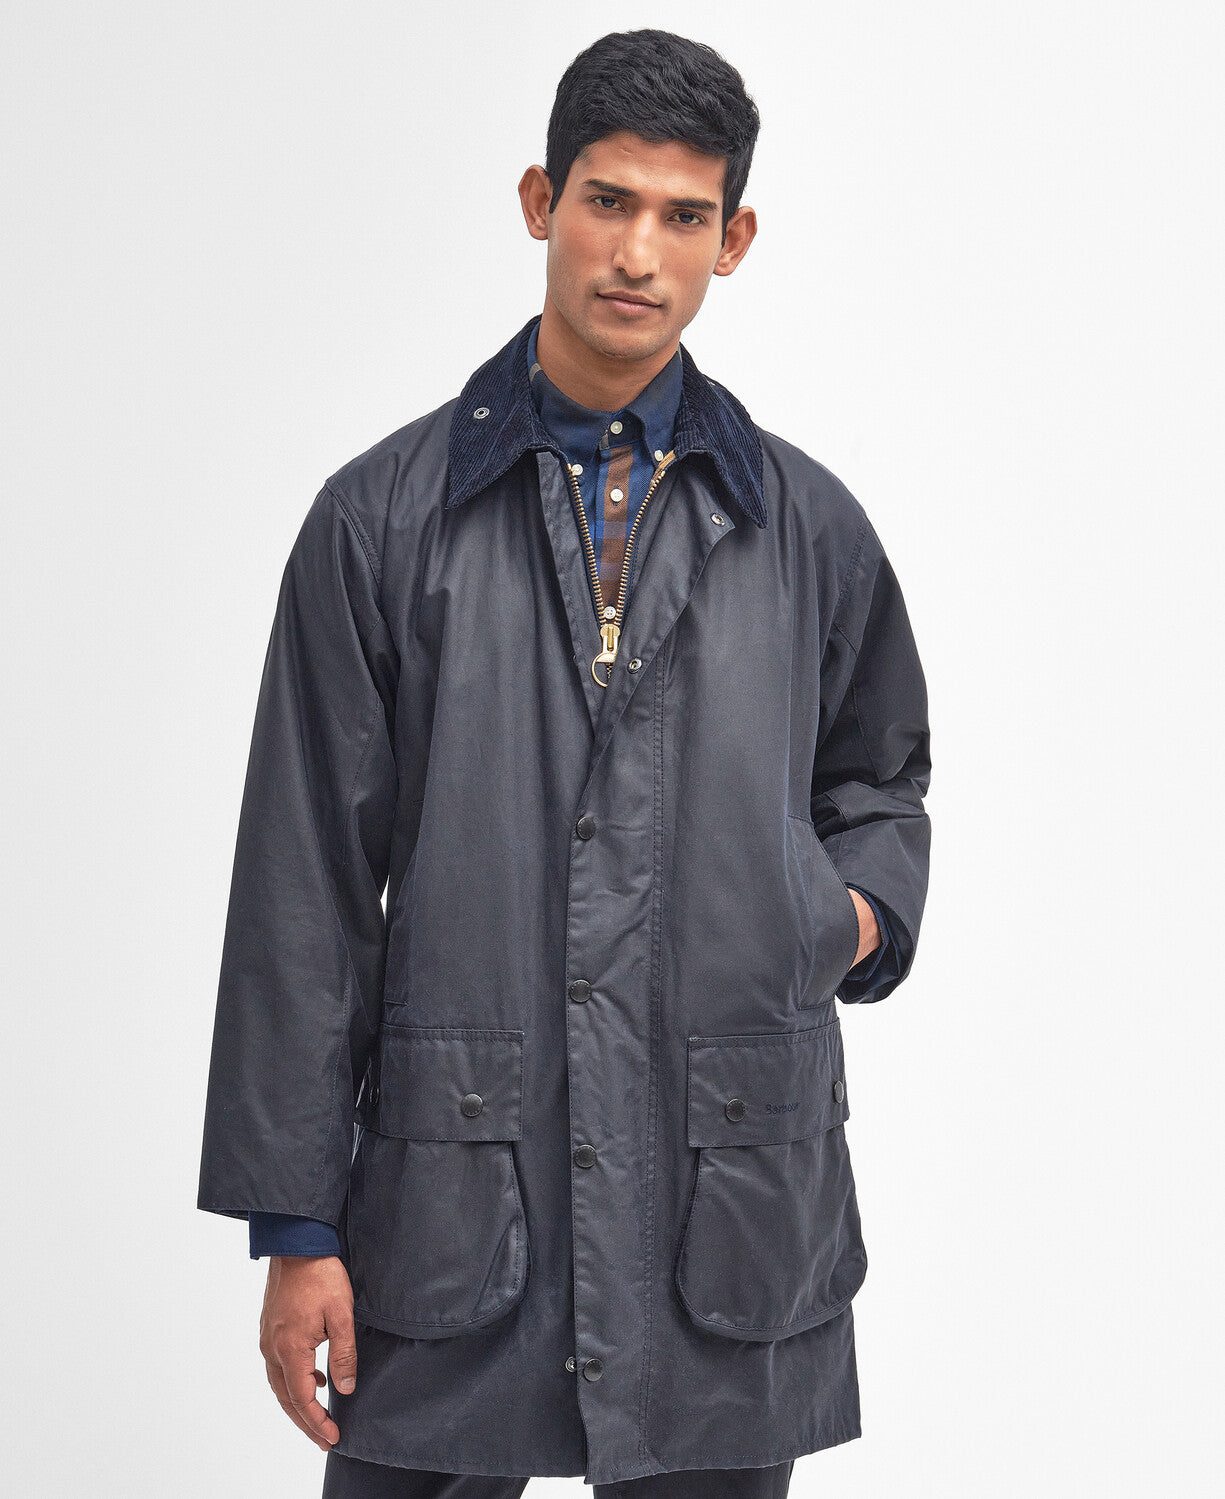 Barbour Border Waxed Jacket